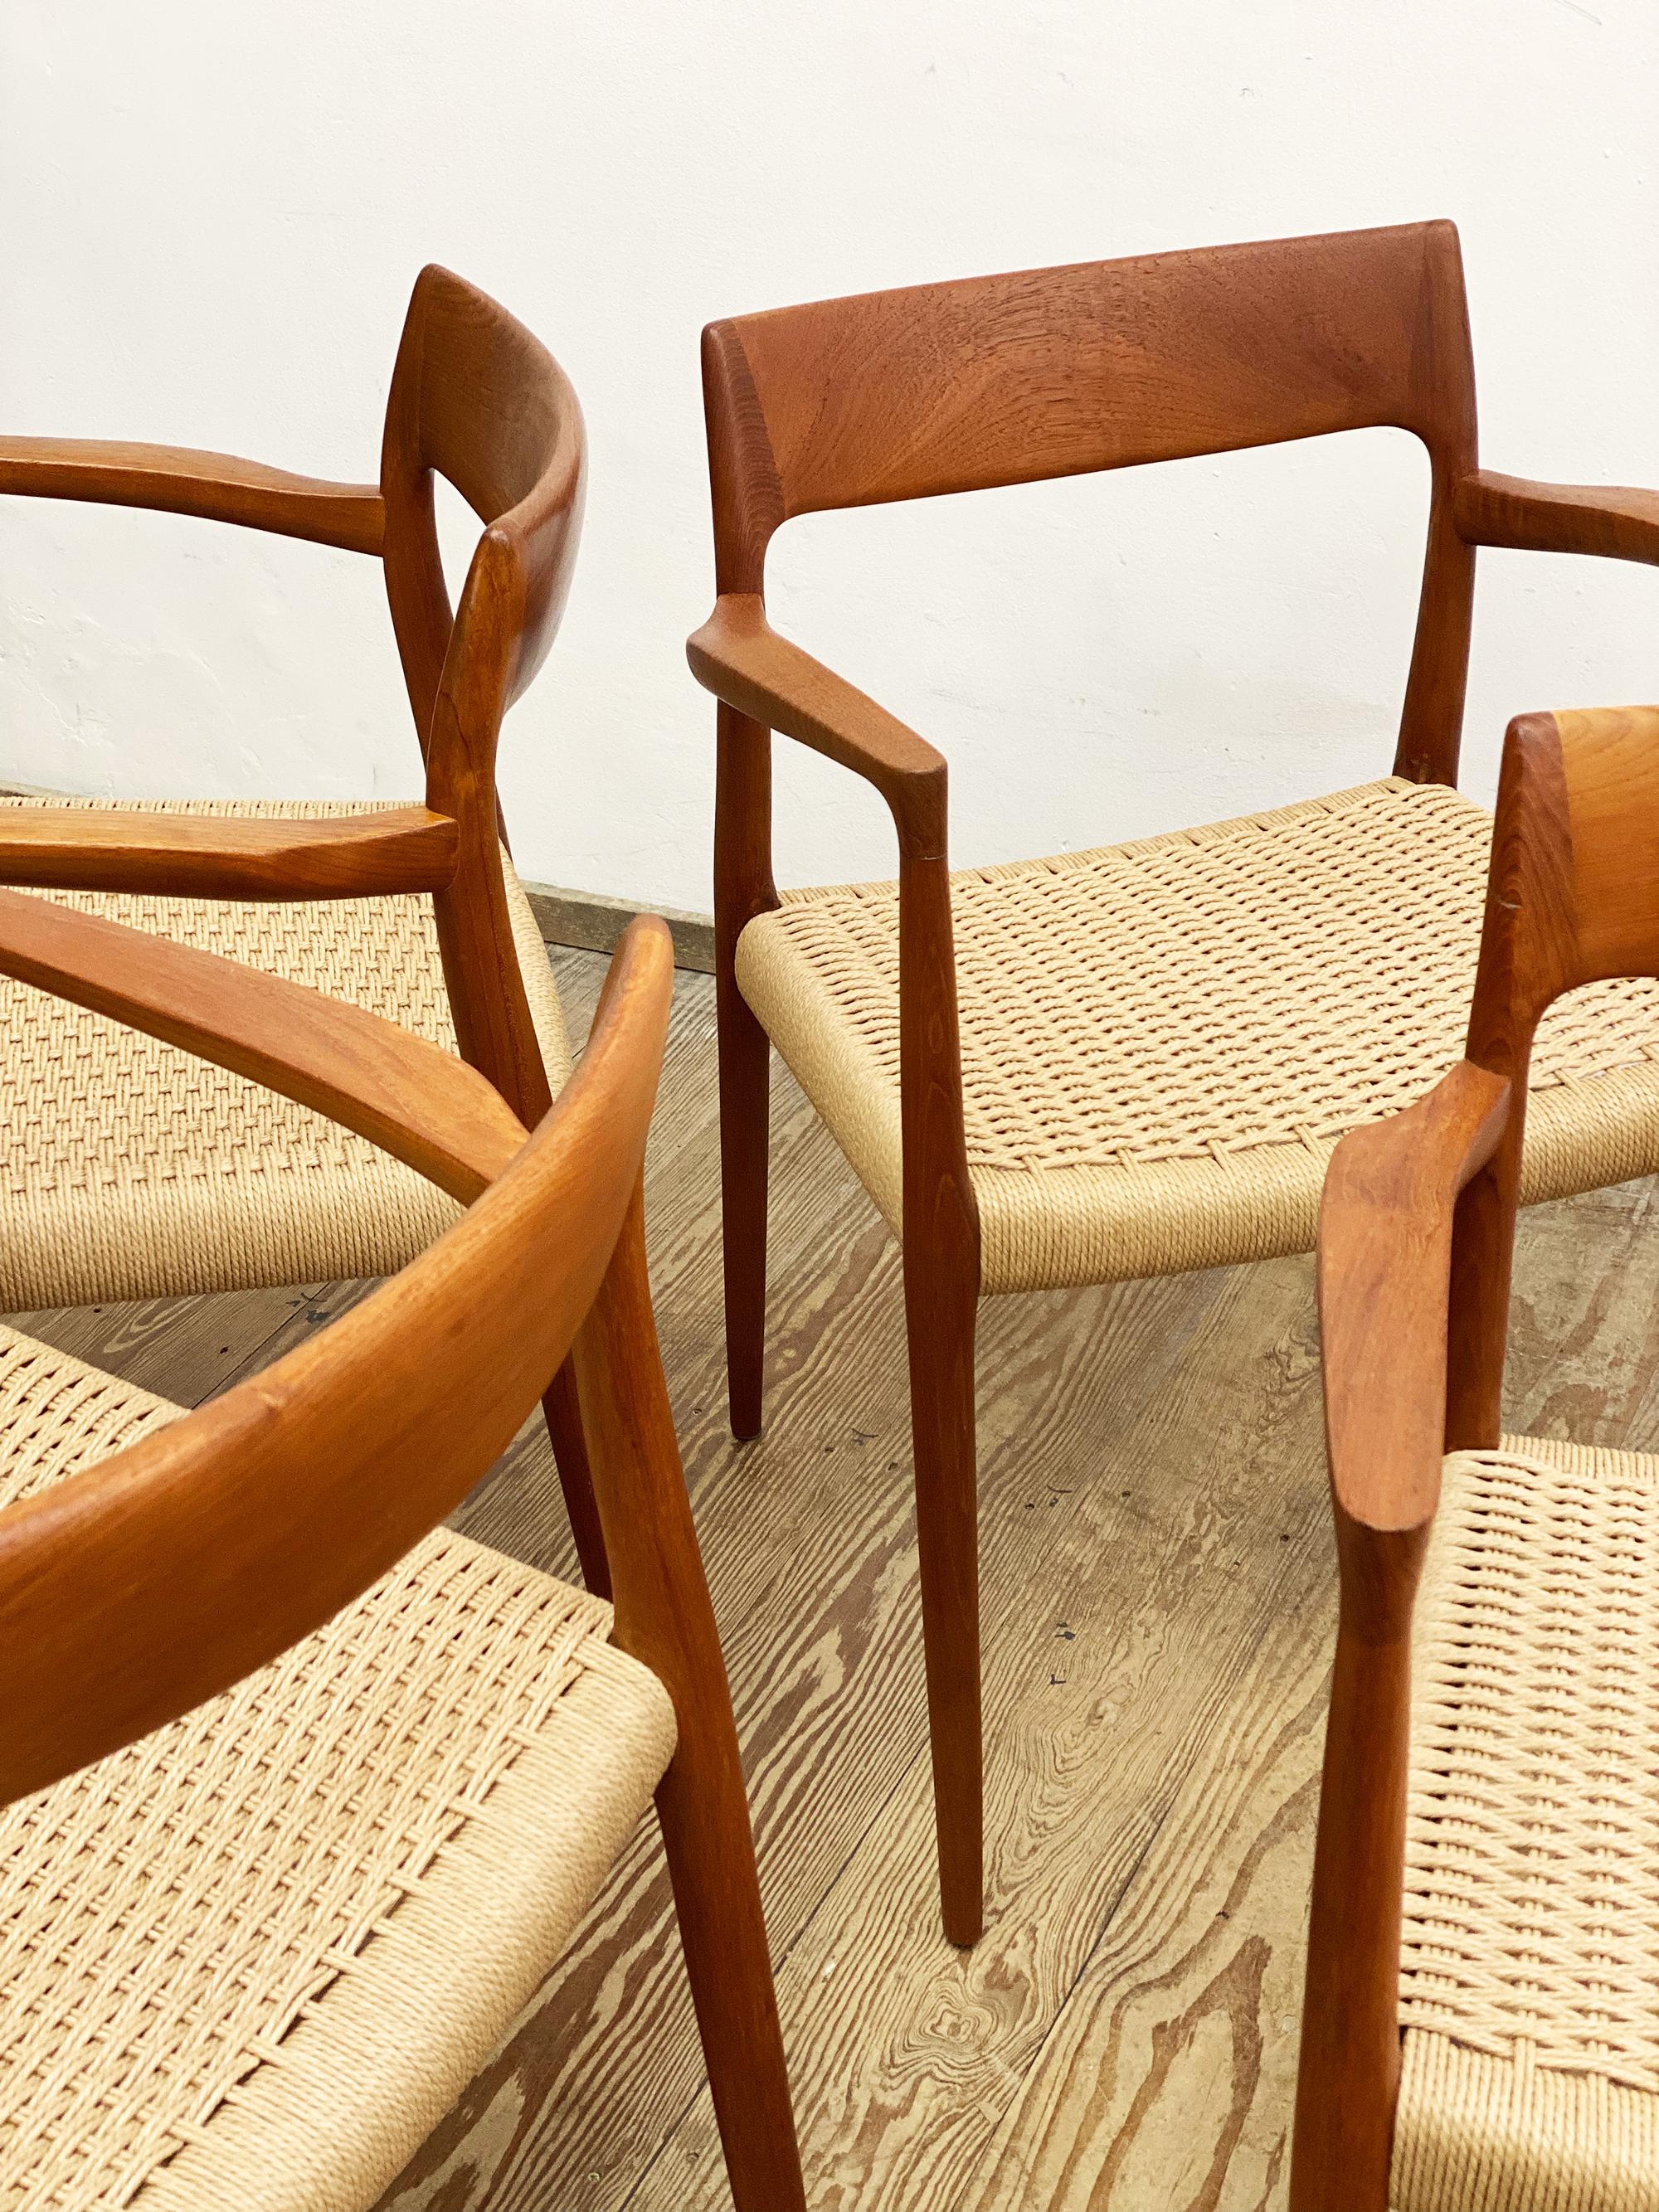 Mid-20th Century 4 Danish Mid-Century Teak Dining Chairs #57 by Niels O. Møller for J. L. Moller